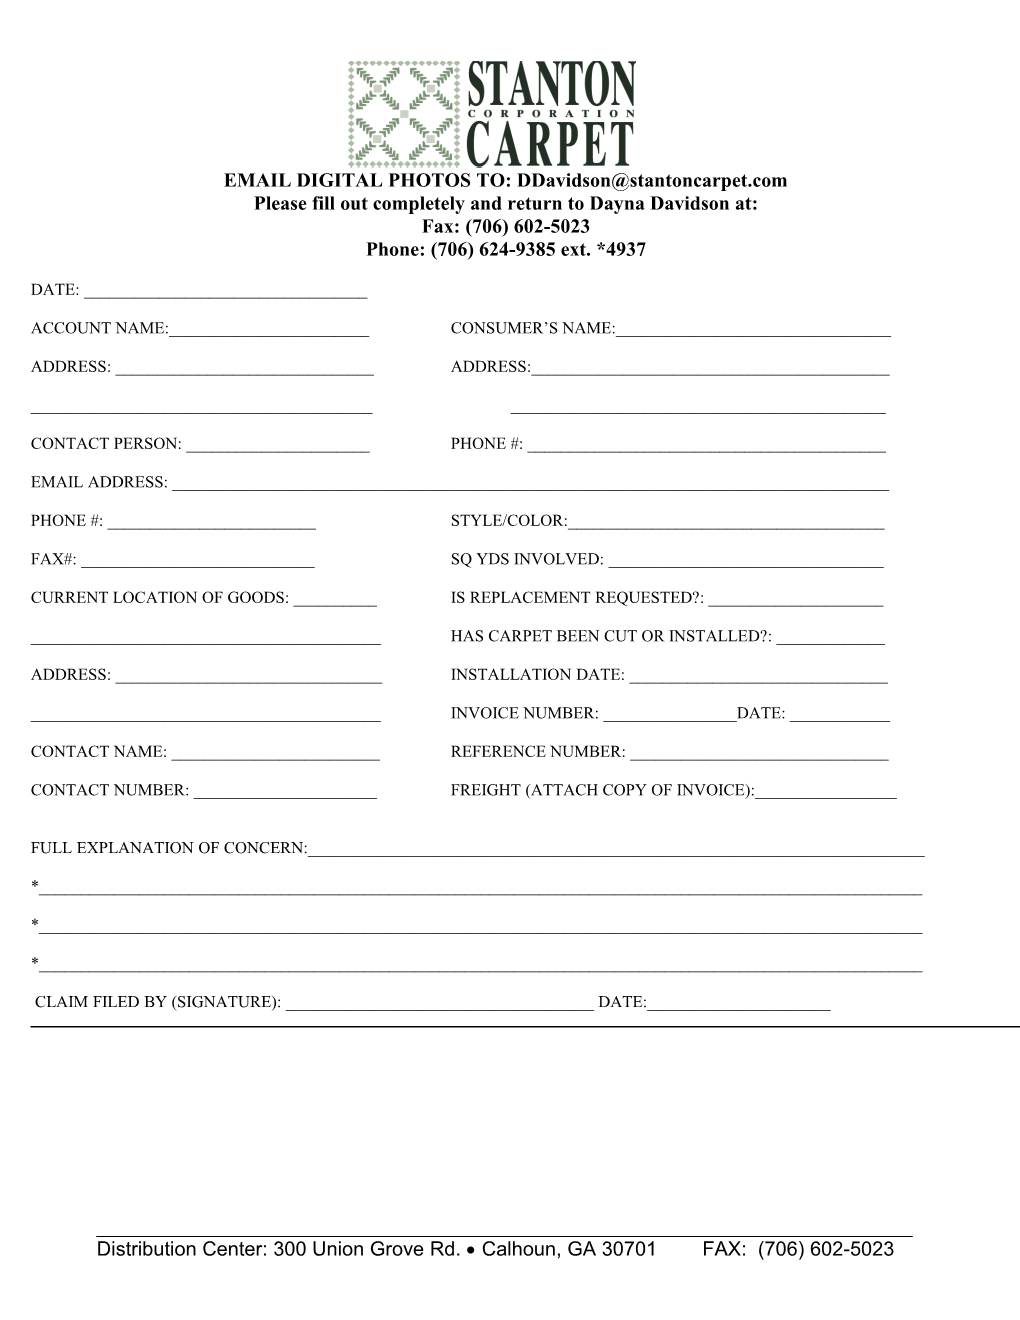 Please Fill out Completely and Return to Dayna Davidson At